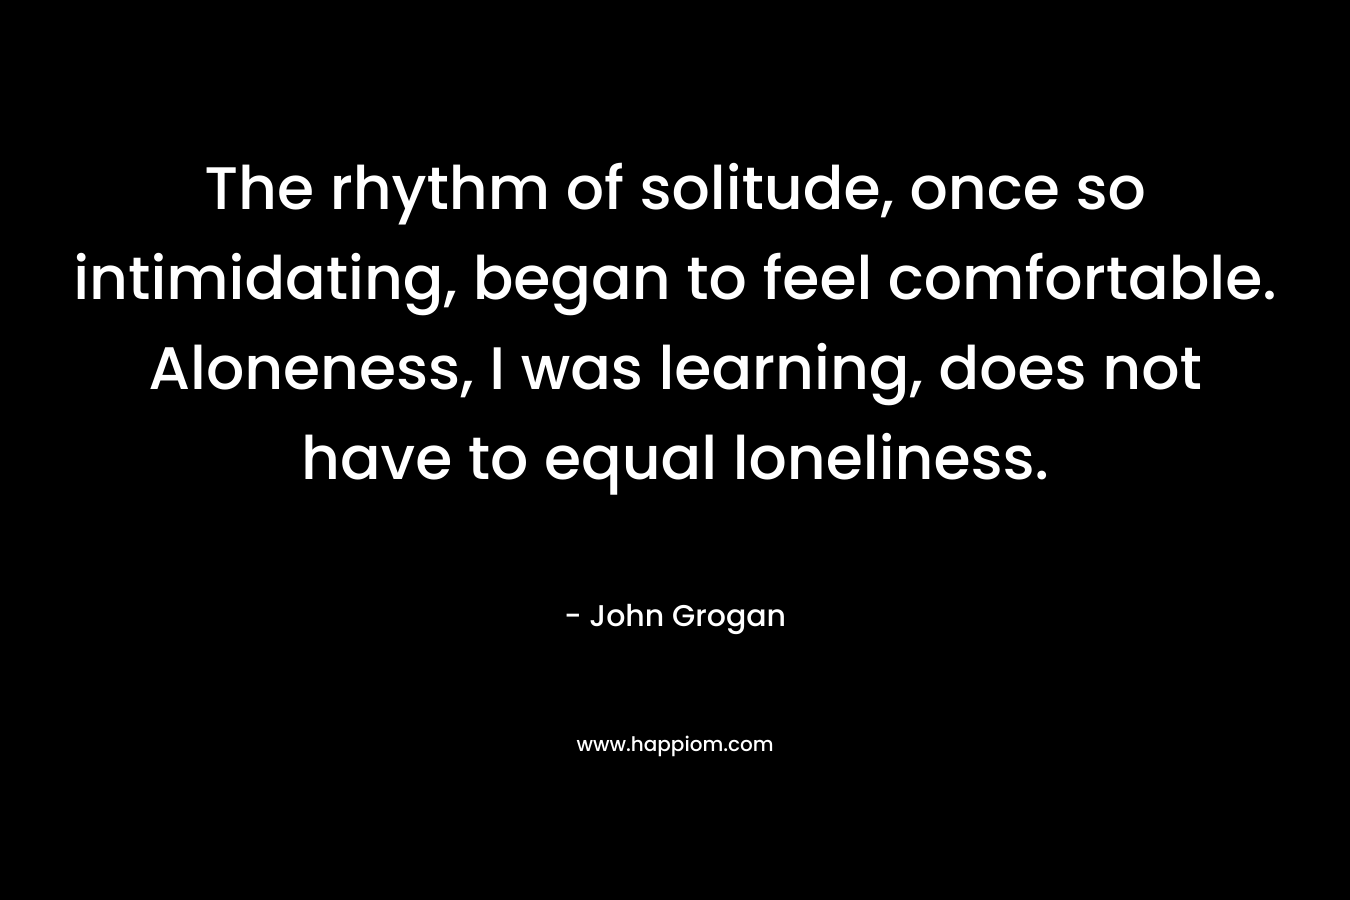 The rhythm of solitude, once so intimidating, began to feel comfortable. Aloneness, I was learning, does not have to equal loneliness.